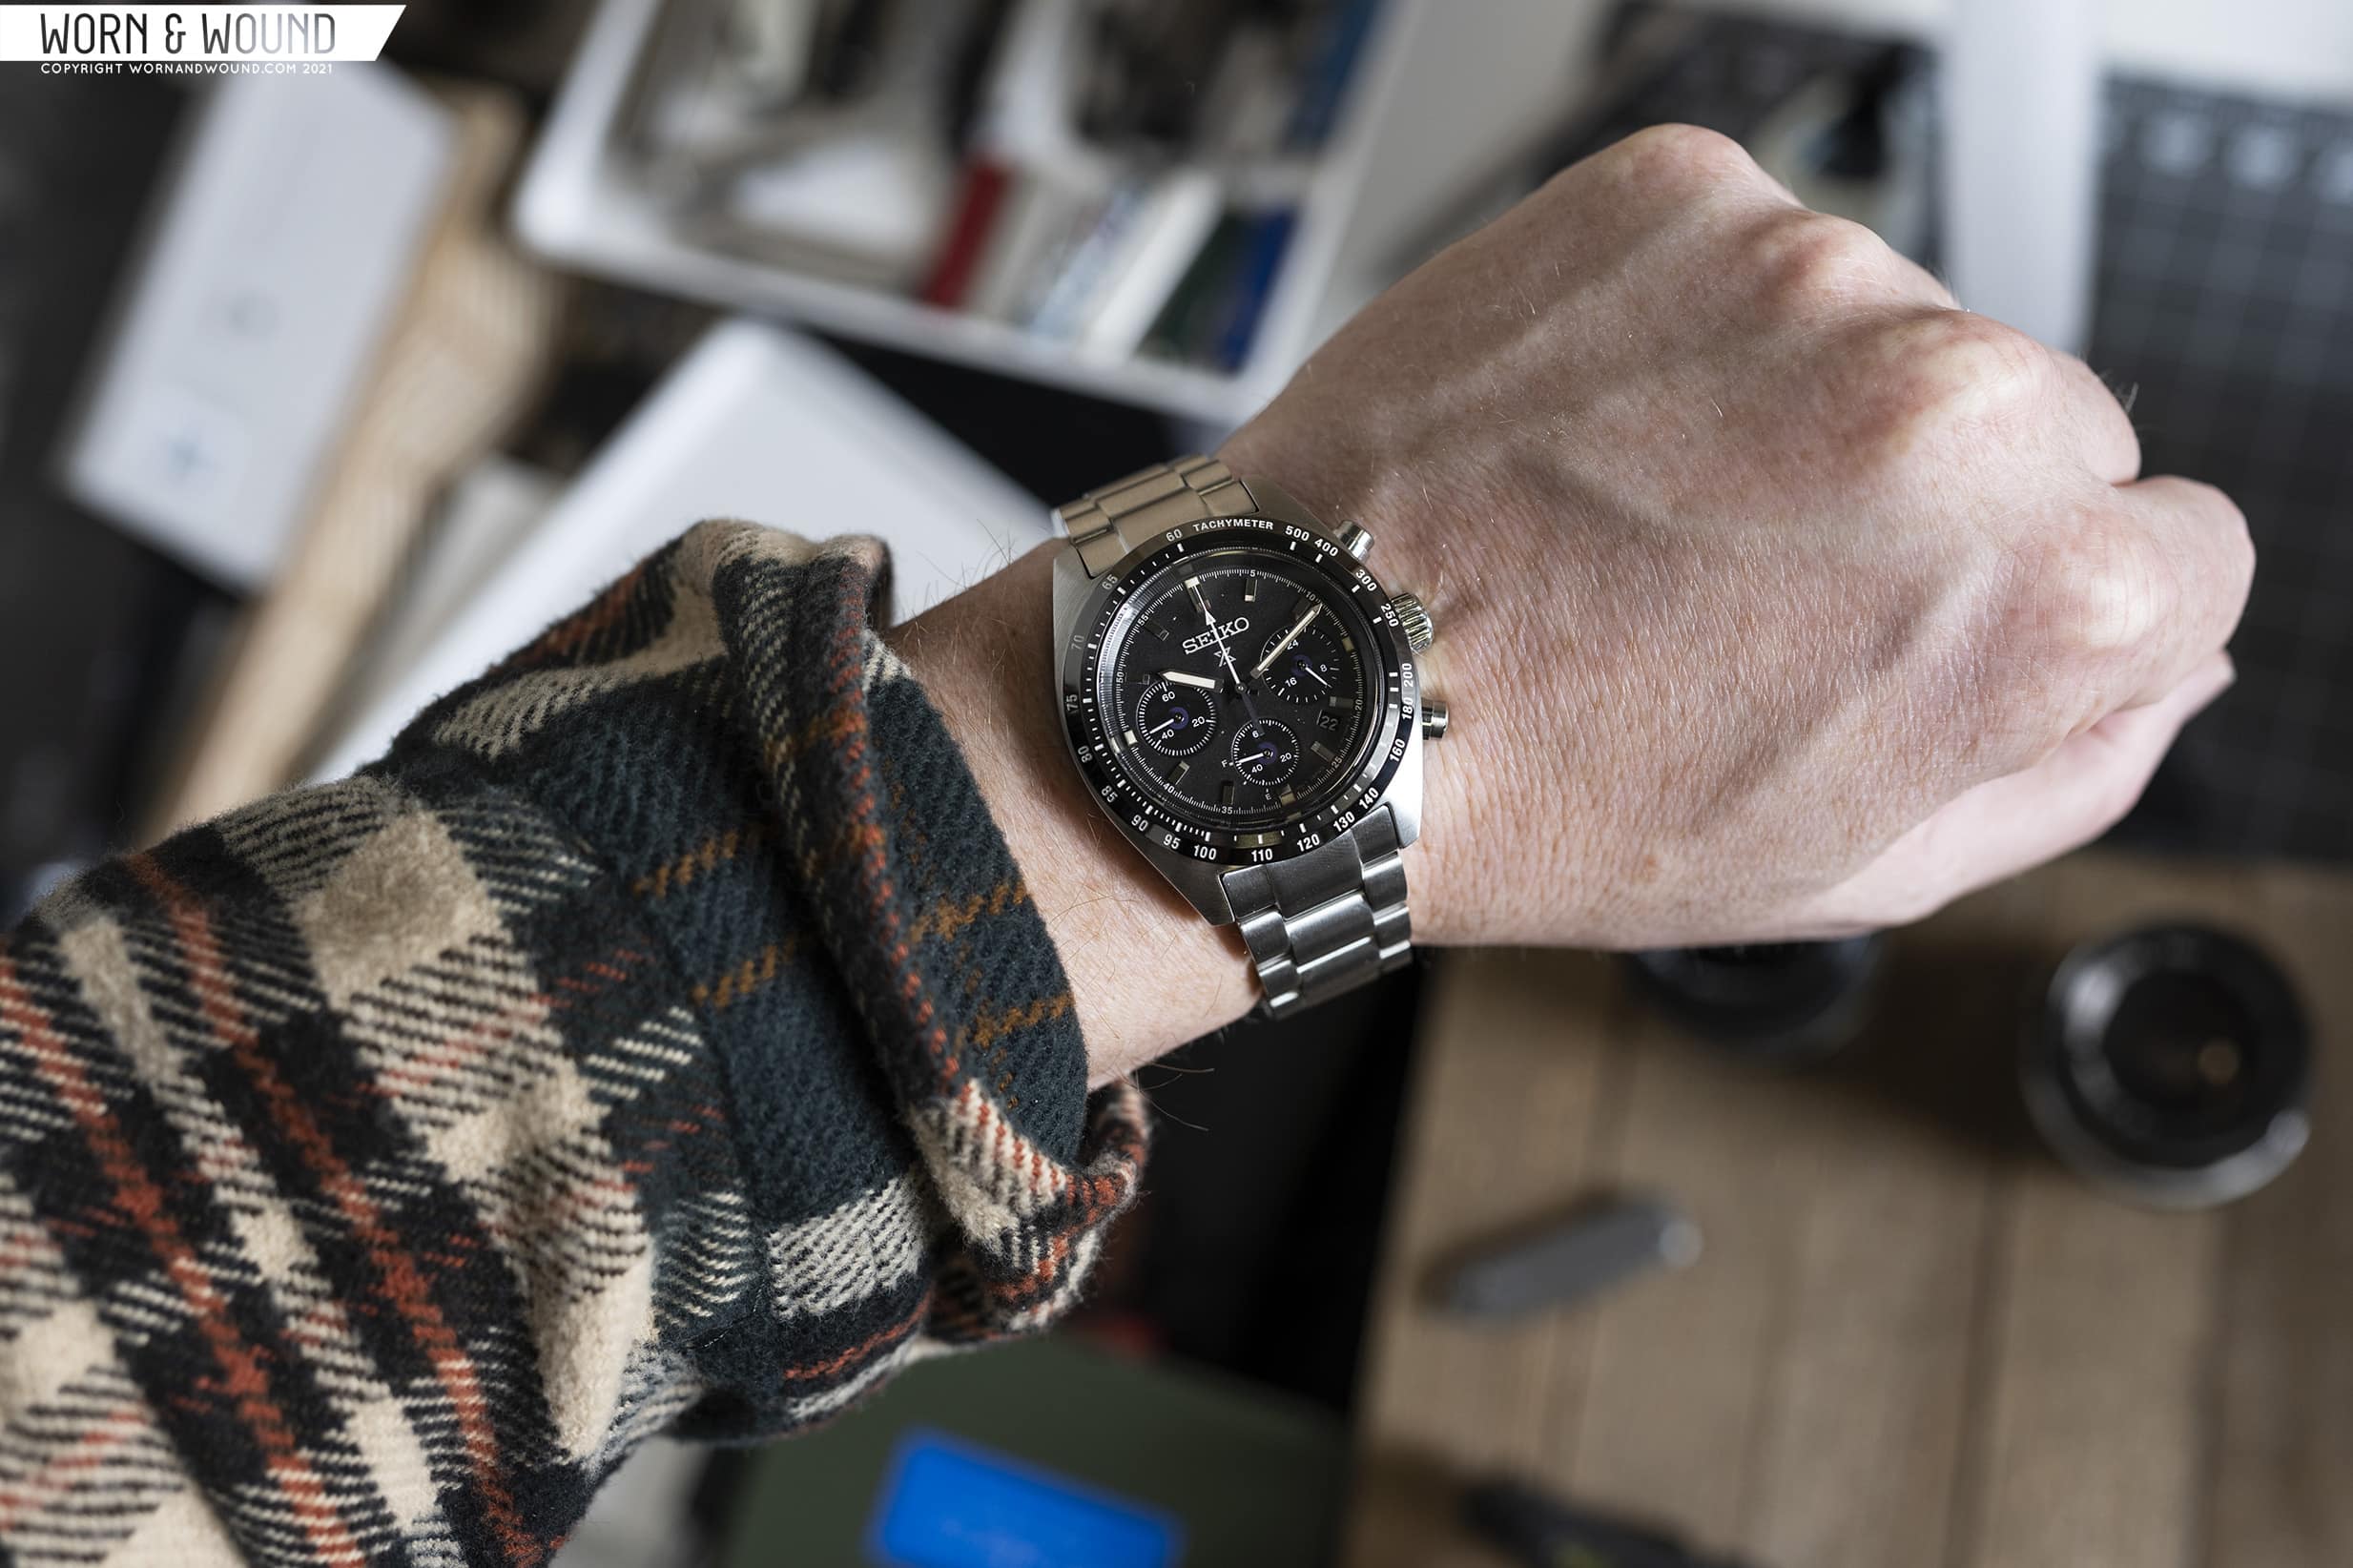 The Seiko The Sleeper Chronograph Of The Year - Worn & Wound